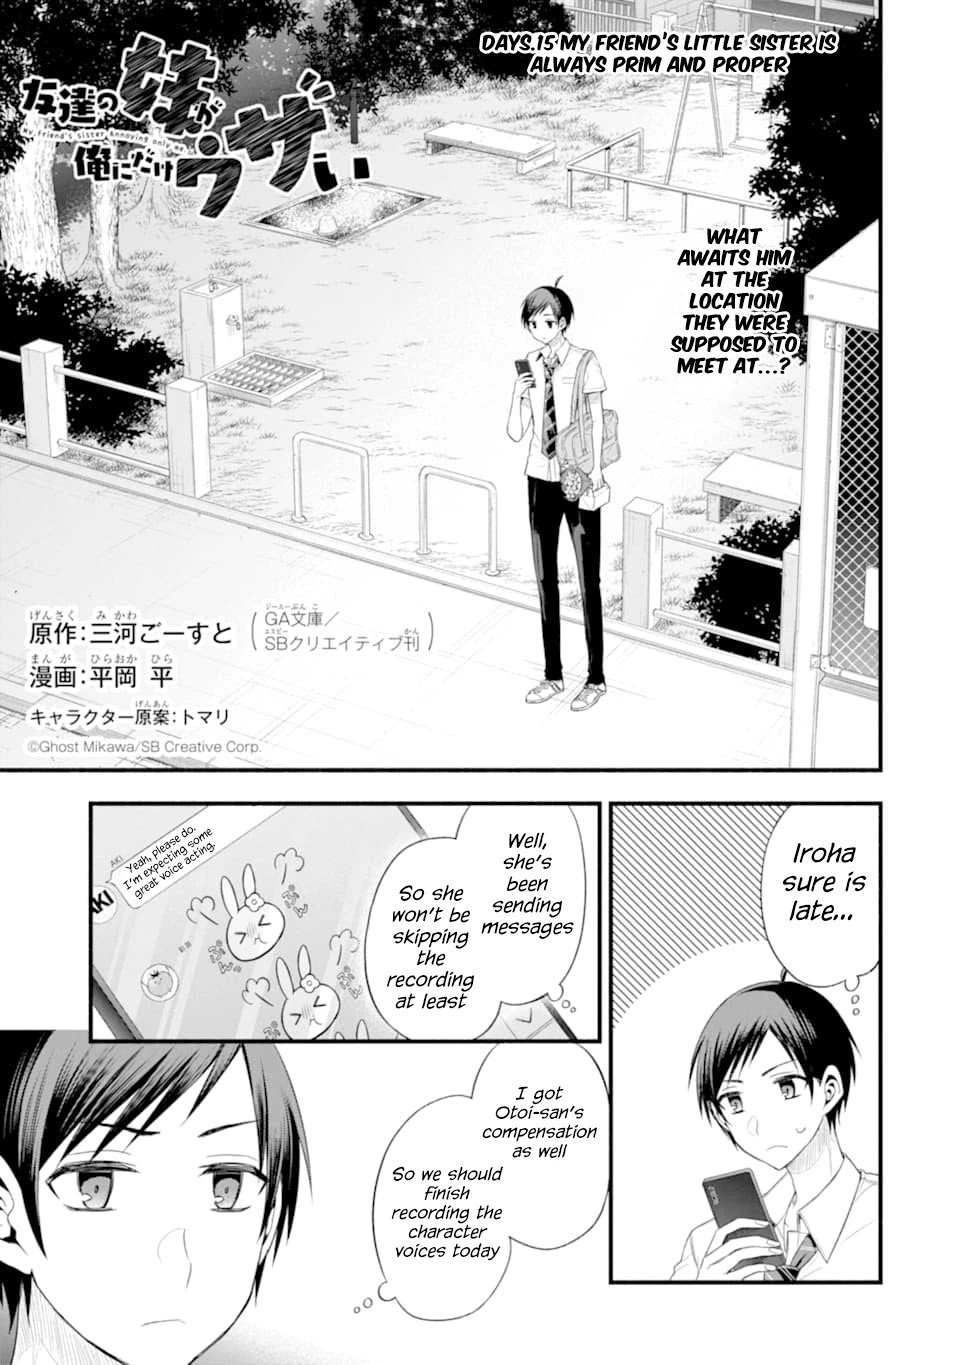 My Friend's Little Sister Is Only Annoying to Me - chapter 15 - #1